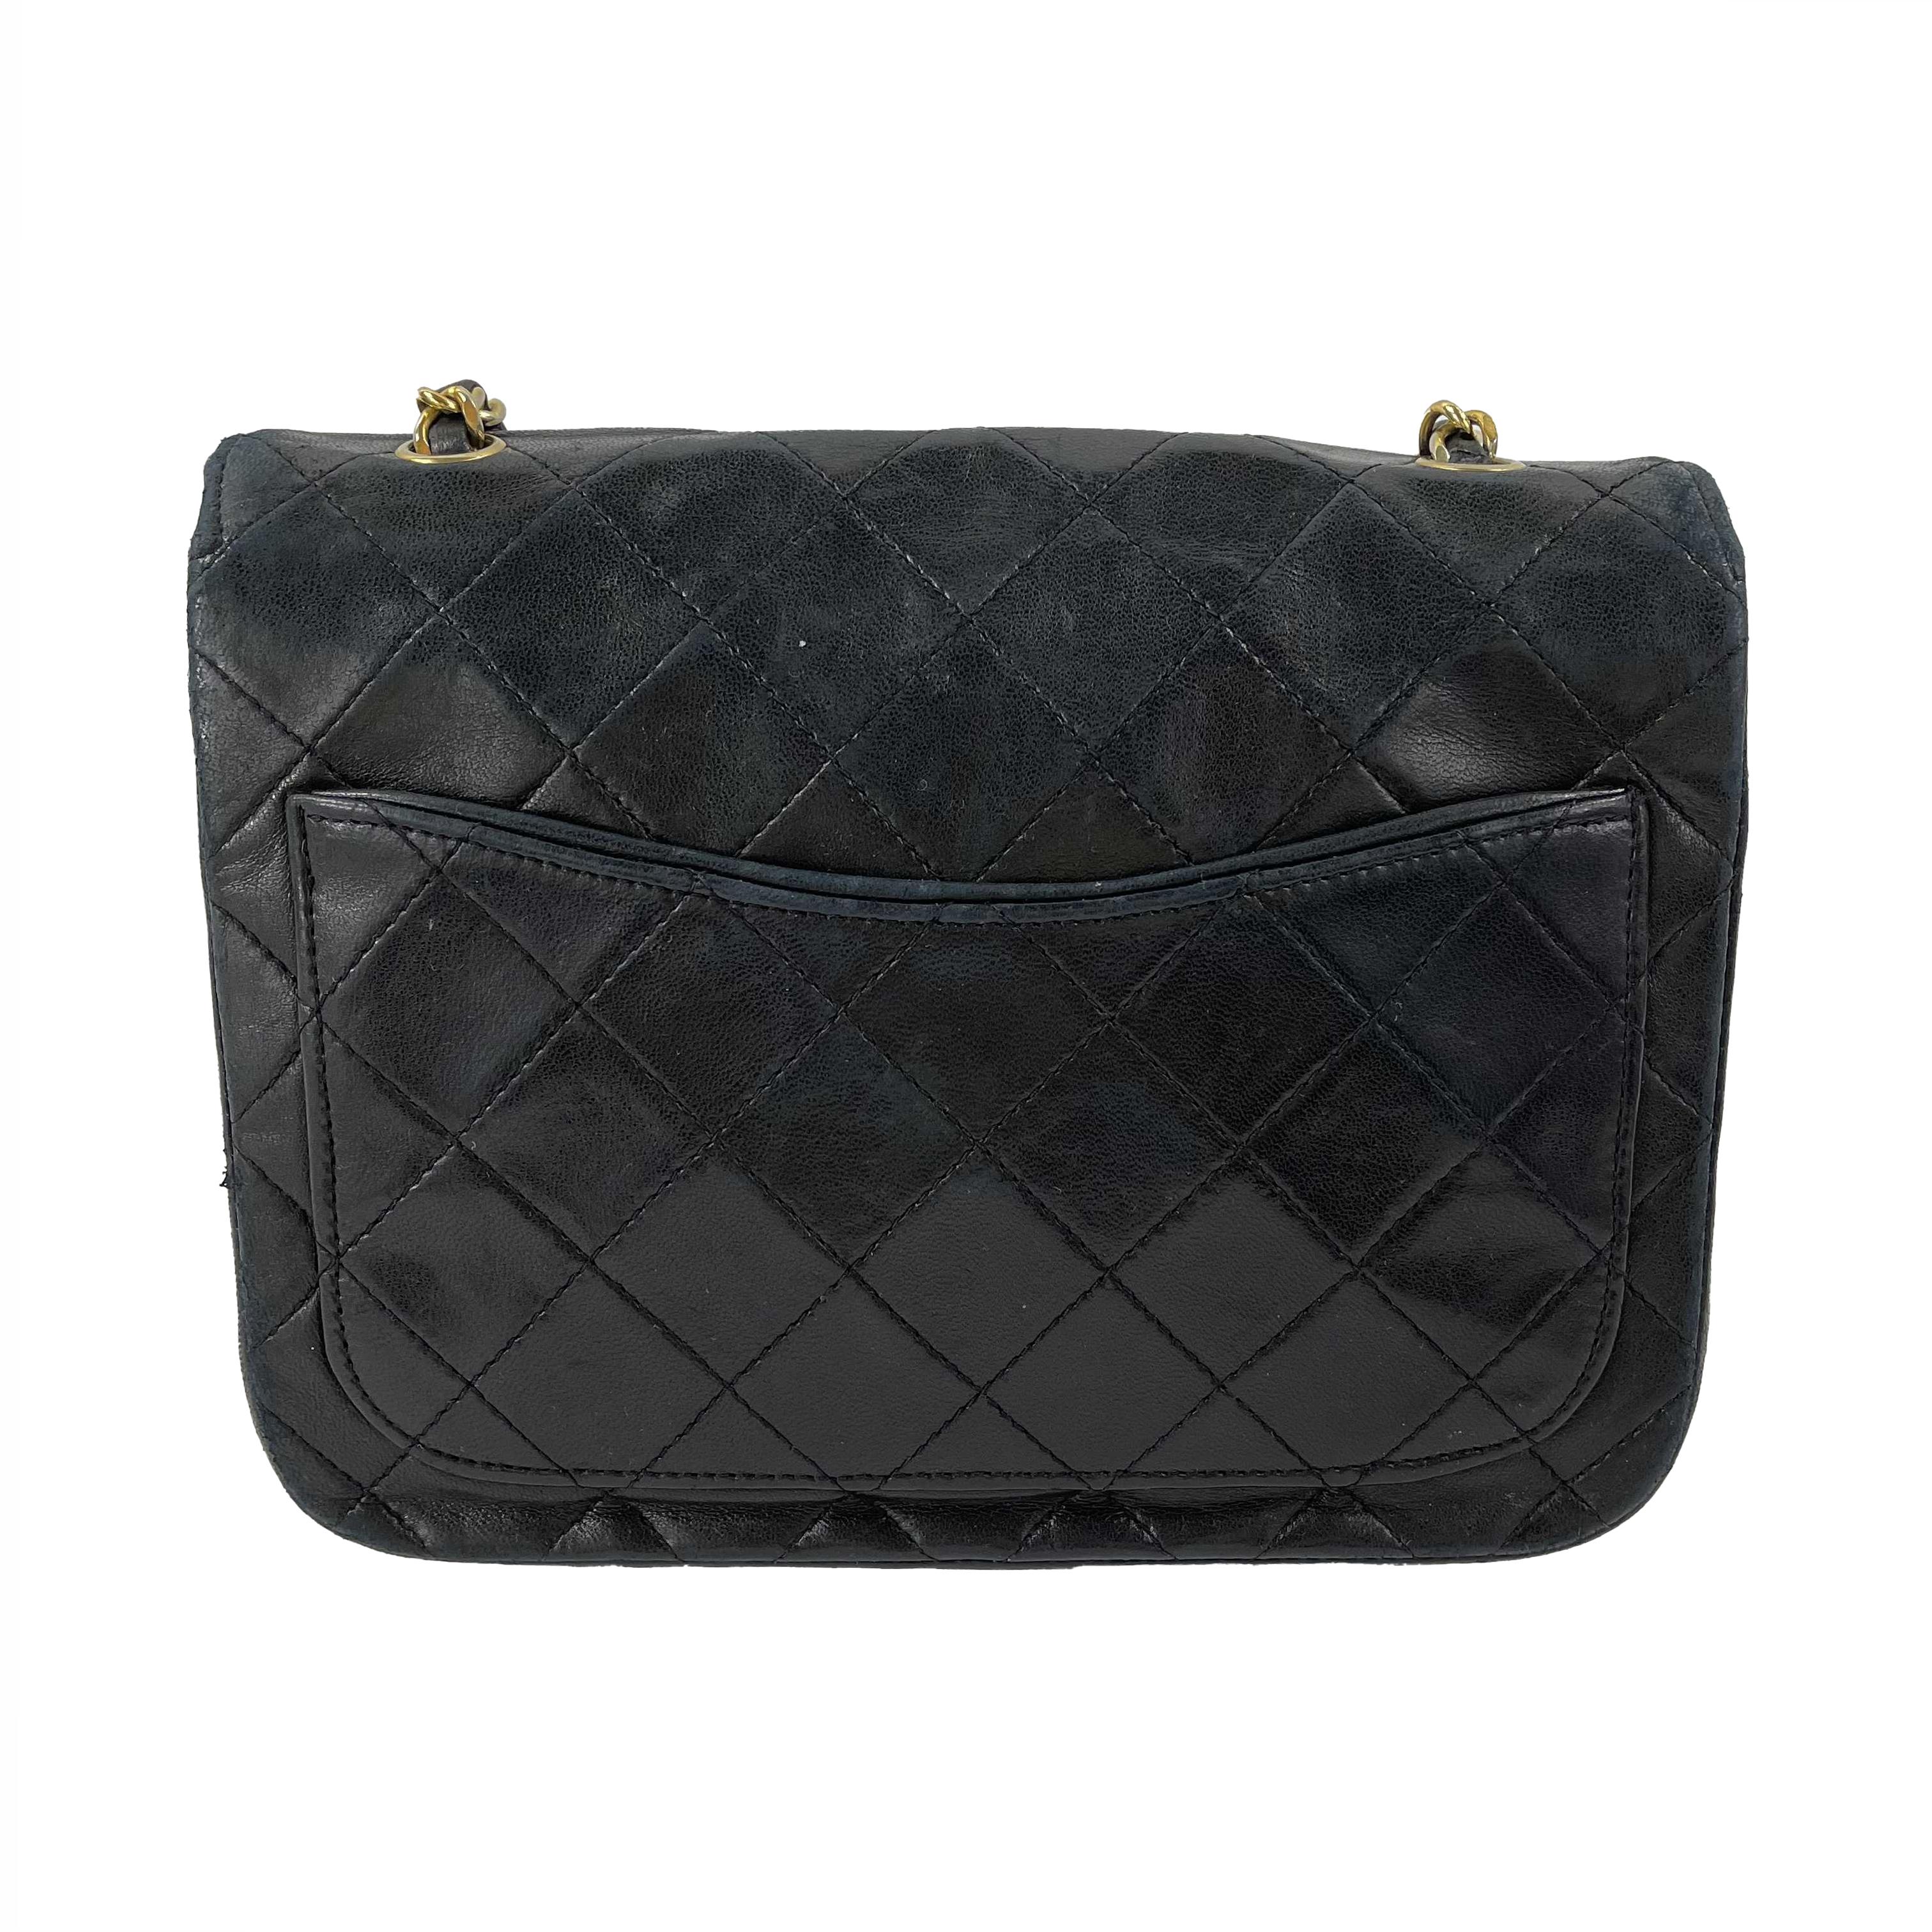 CHANEL - Vintage Quilted and Striped Leather Envelope Flap - Black, Gold and Silver- Toned Hardware - Handbag

Description

This vintage Chanel flap handbag is crafted with black lambskin leather and gold-toned hardware. The front side of the bag